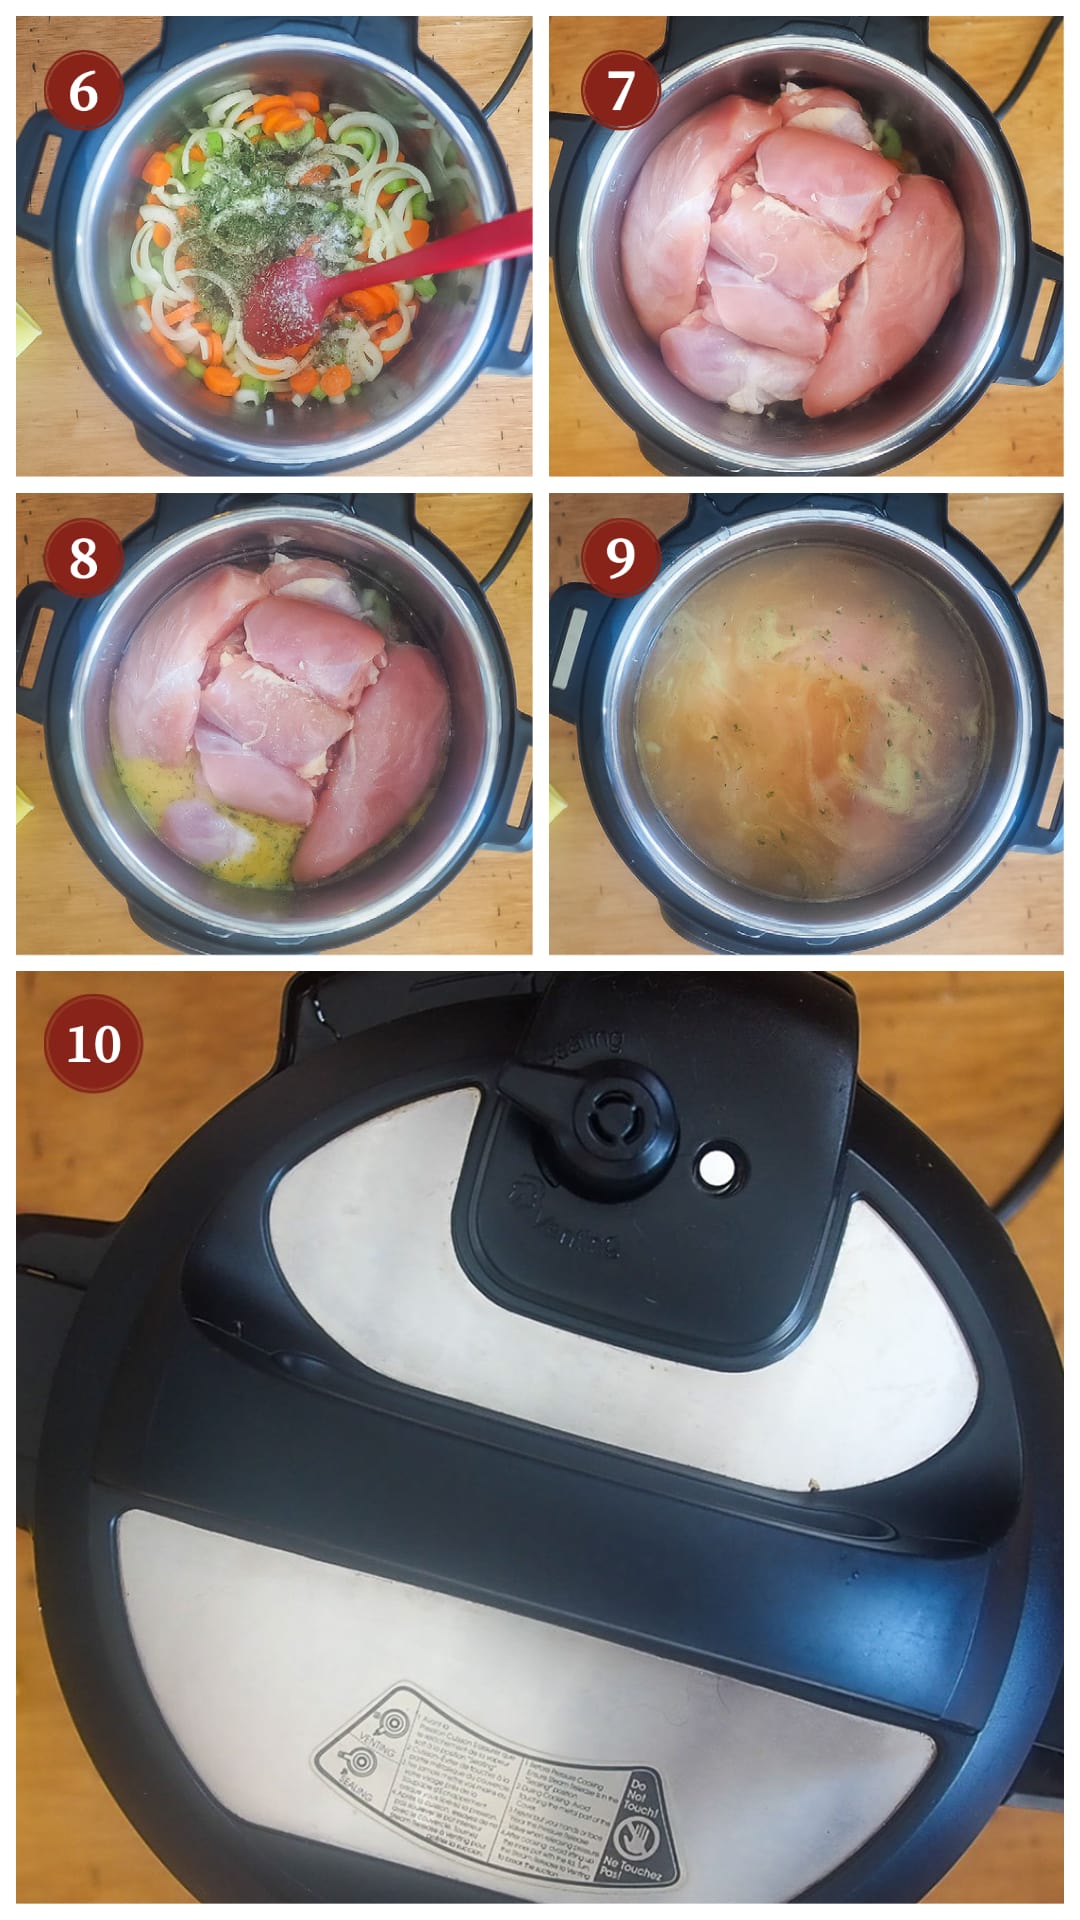 A collage of images showing how to make instant pot chicken noodle soup, steps 6 - 10.